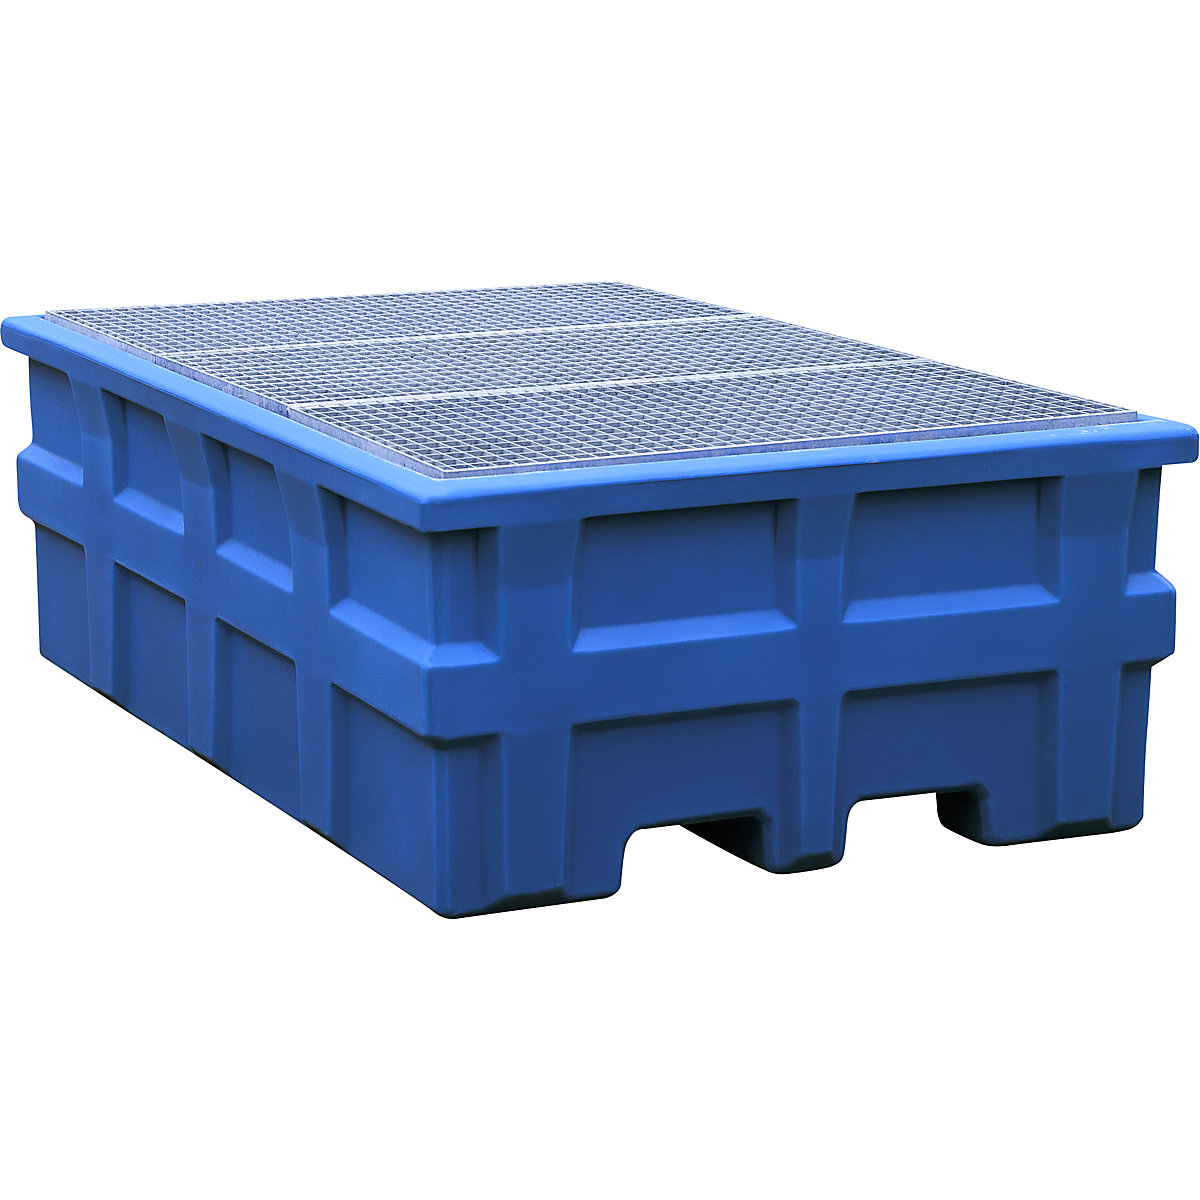 PE sump tray for IBC/CTC tank containers - asecos